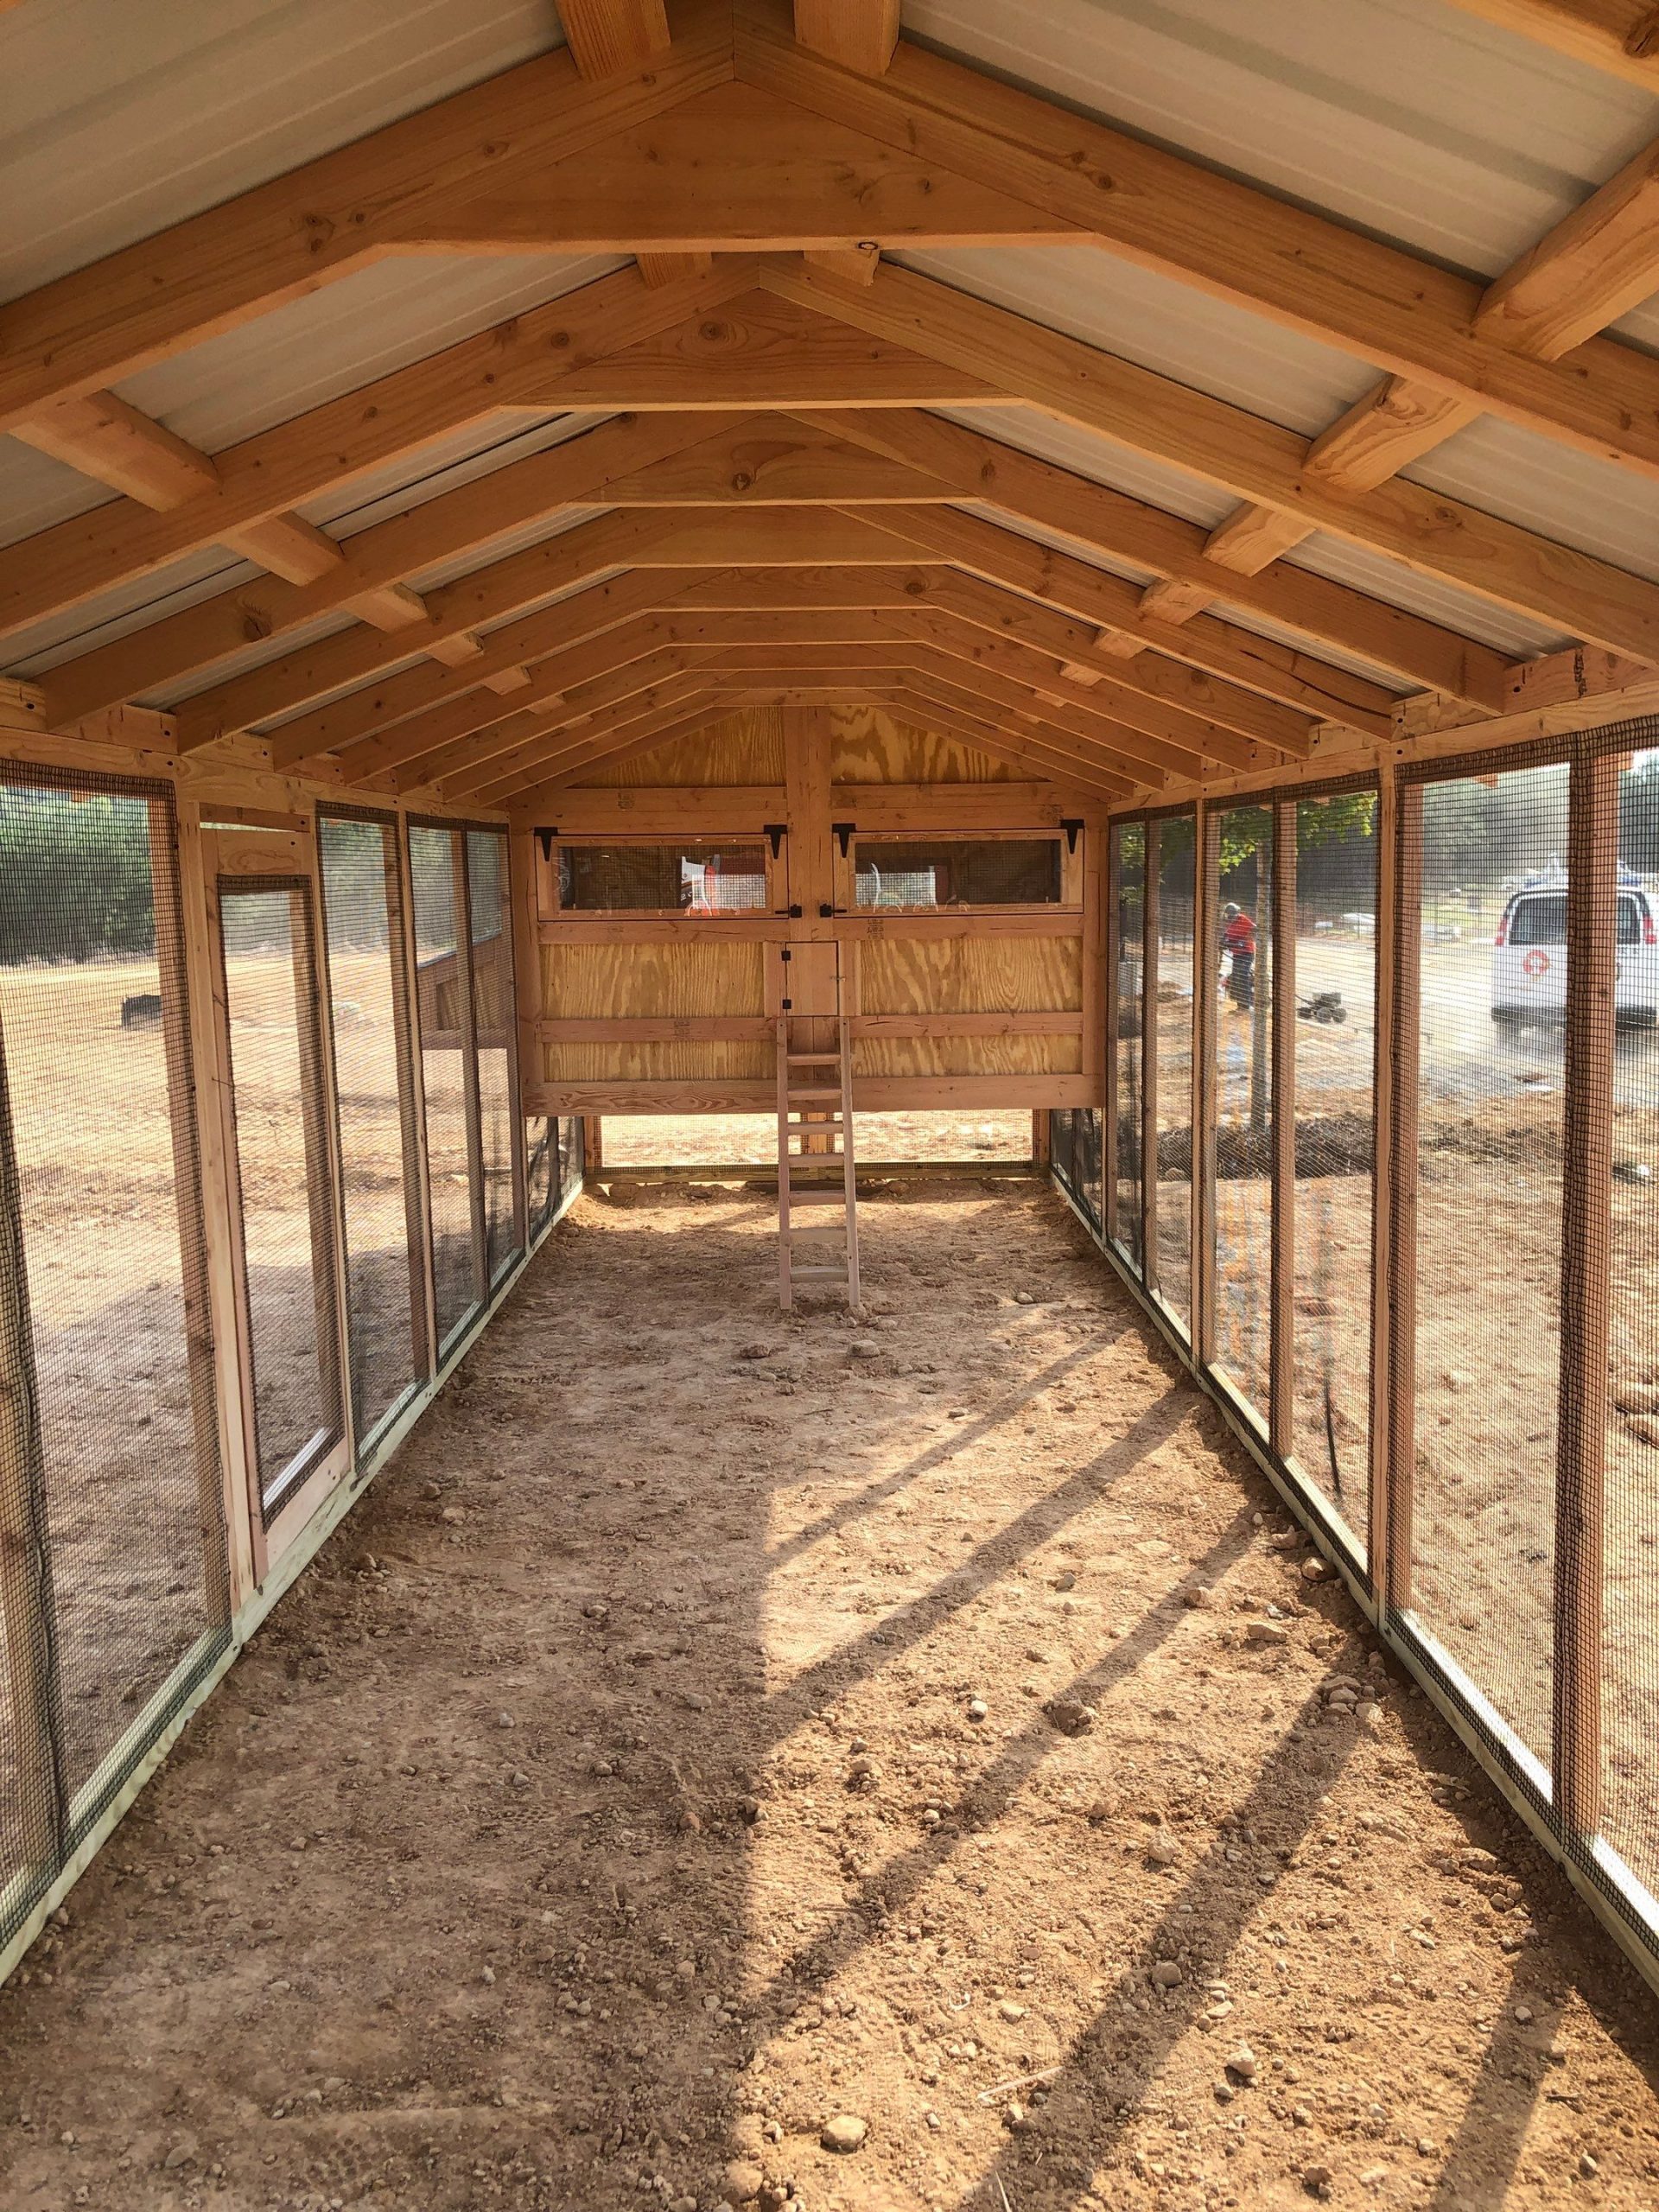 Inside the run of an 8×30 American Coop for the Fulton County Animal Shelter in Atlanta, GA